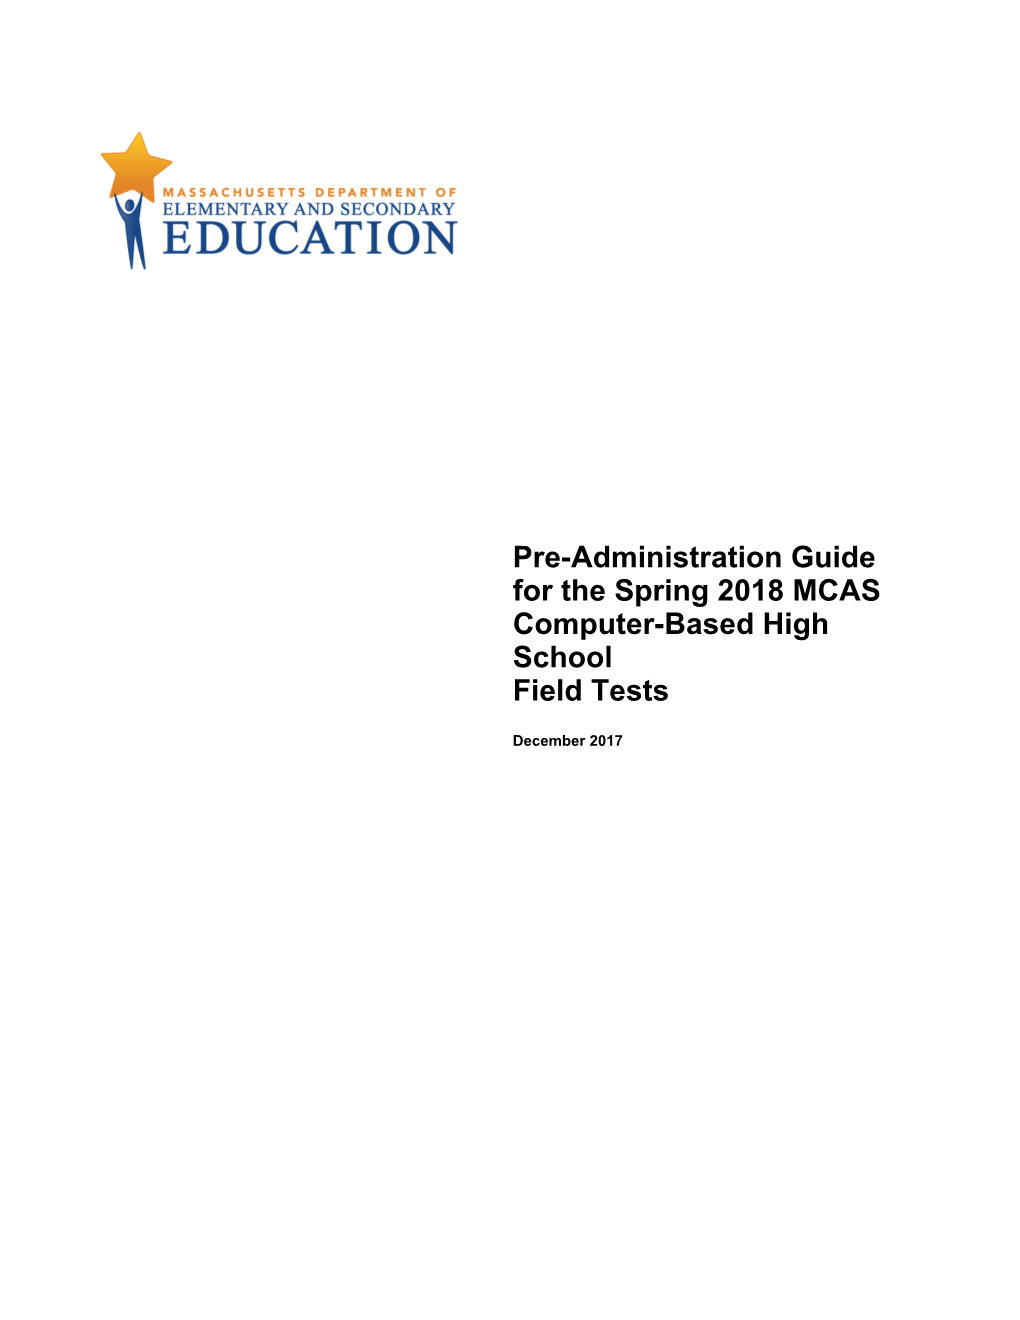 Pre-Administration Guide for the Spring 2018 MCAS Computer-Based High School Field Tests